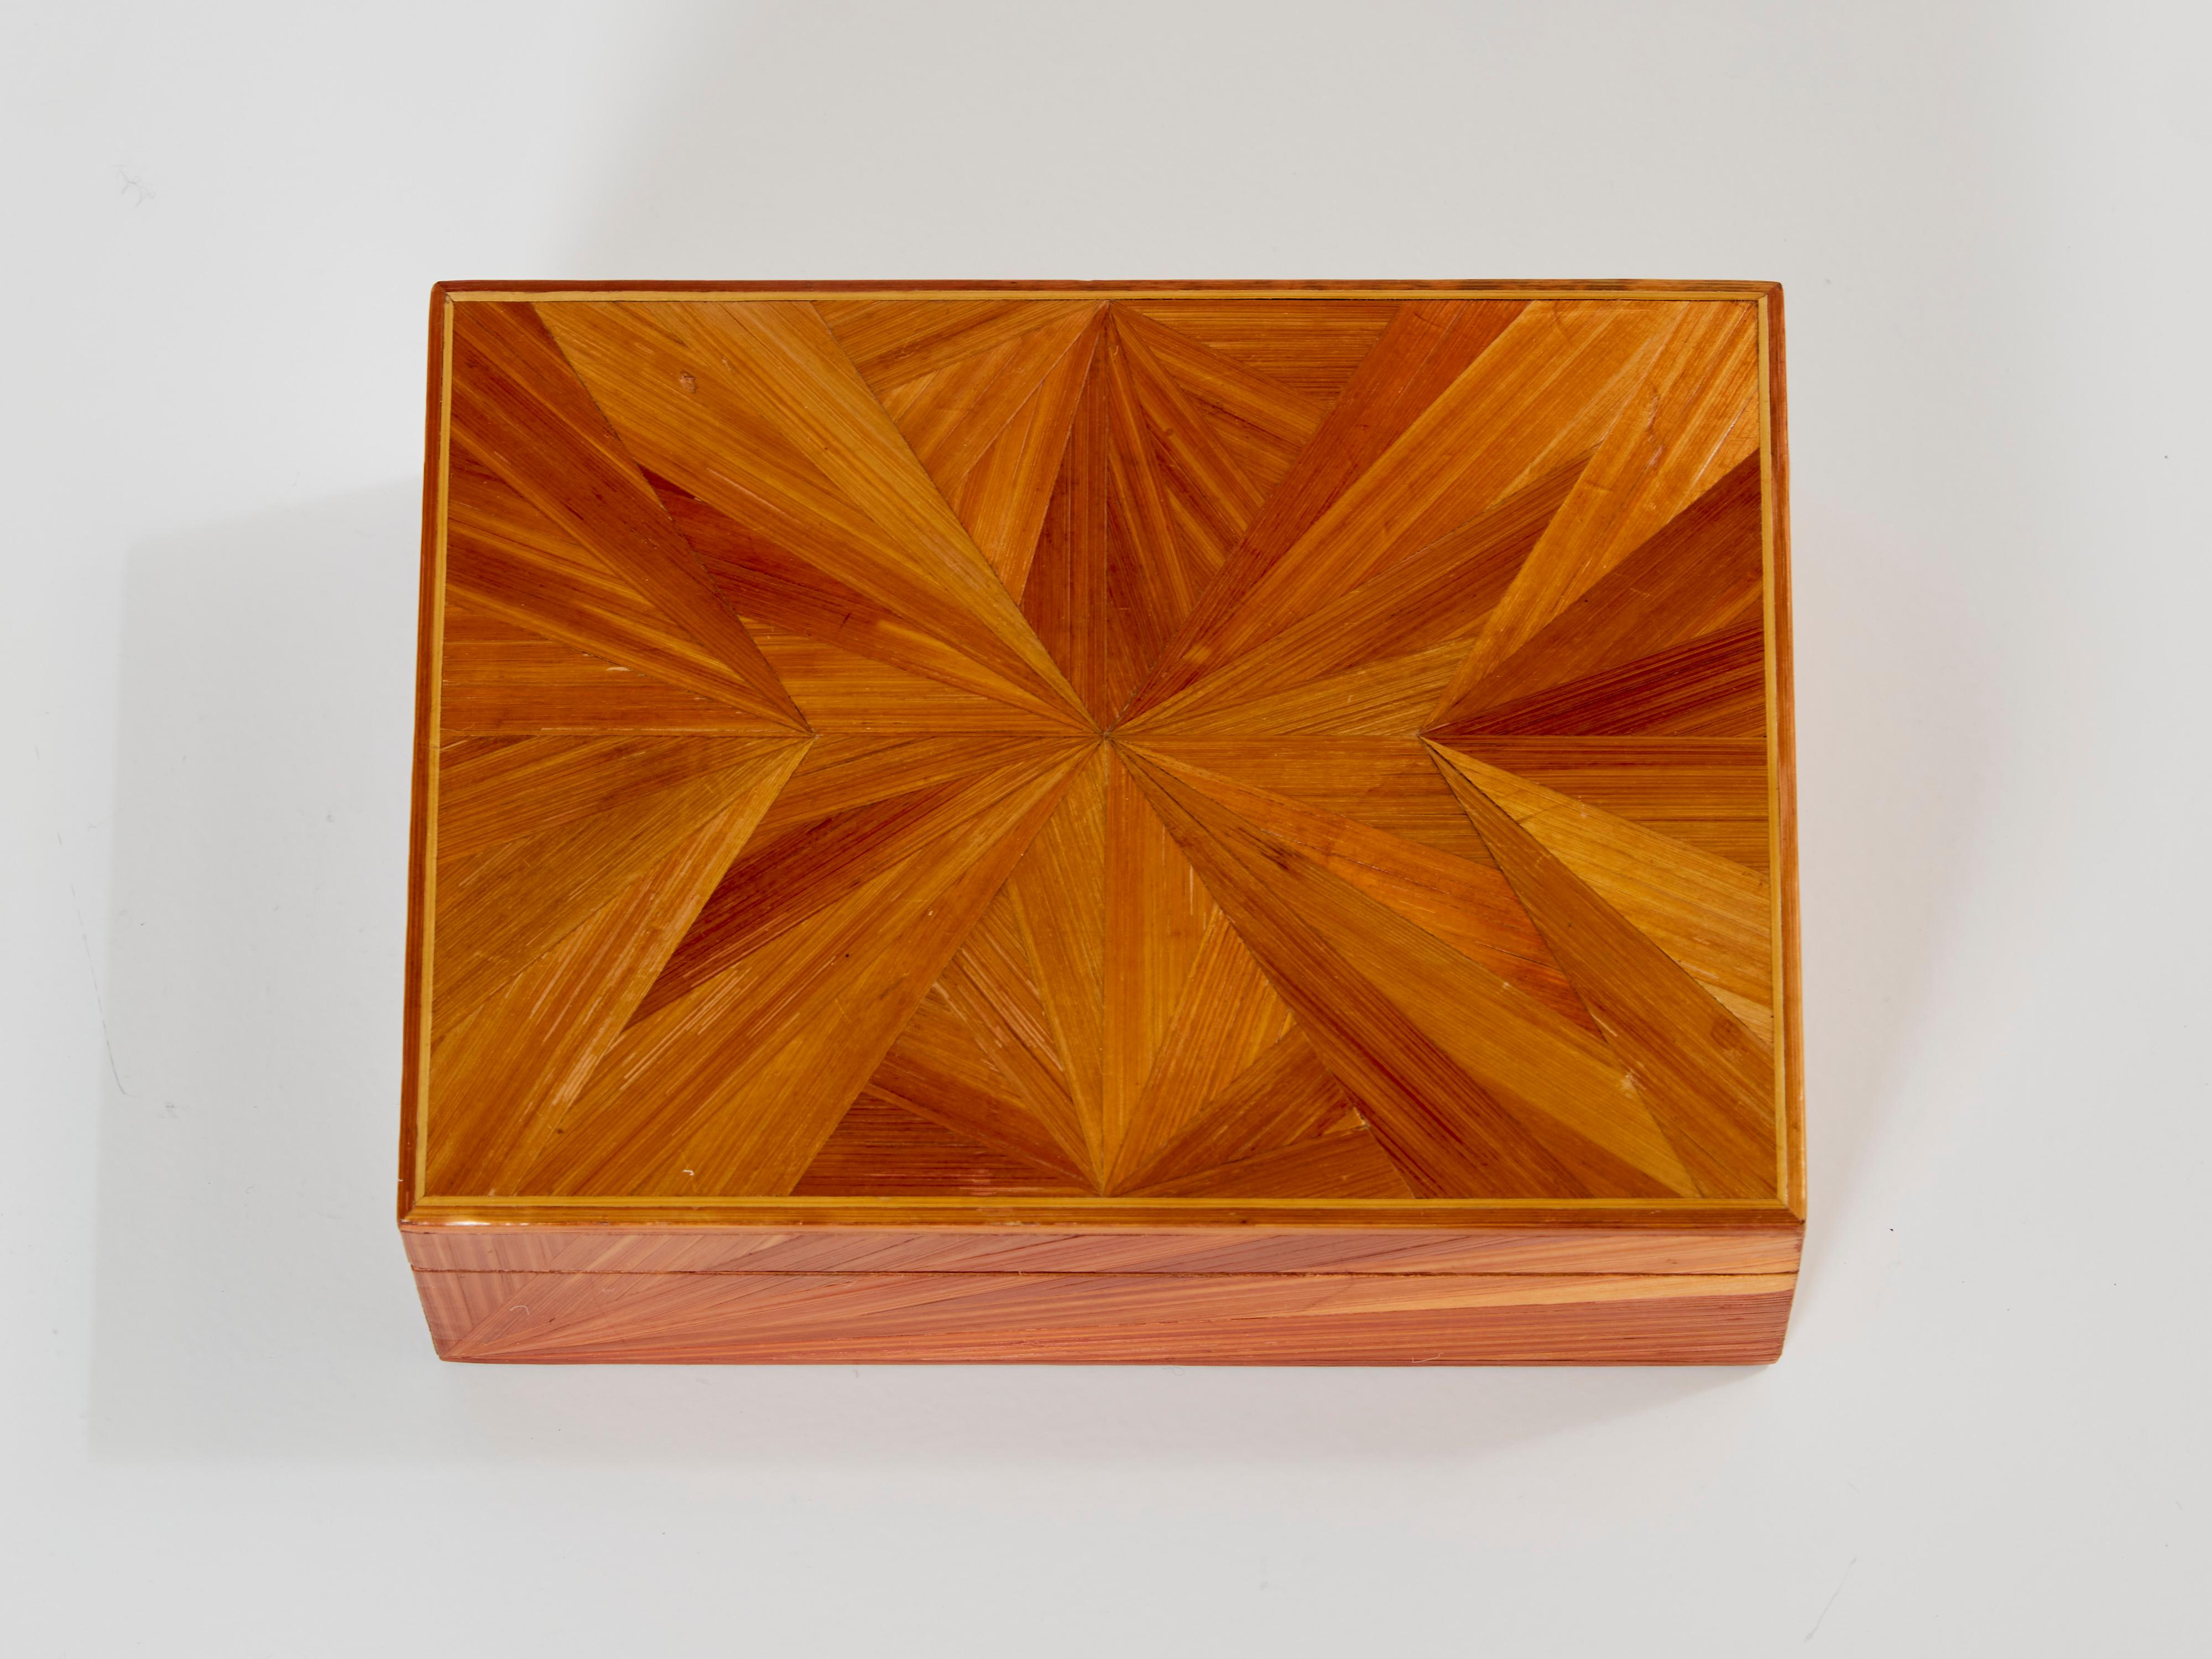 Beautiful Jean-Michel Frank straw marquetry decorative box from the 1930s. Carved from beech wood fully covered by straw marquetry with radiating patterns. It has been fully restored, with slight traces on the marquetry remaining, and the yellow